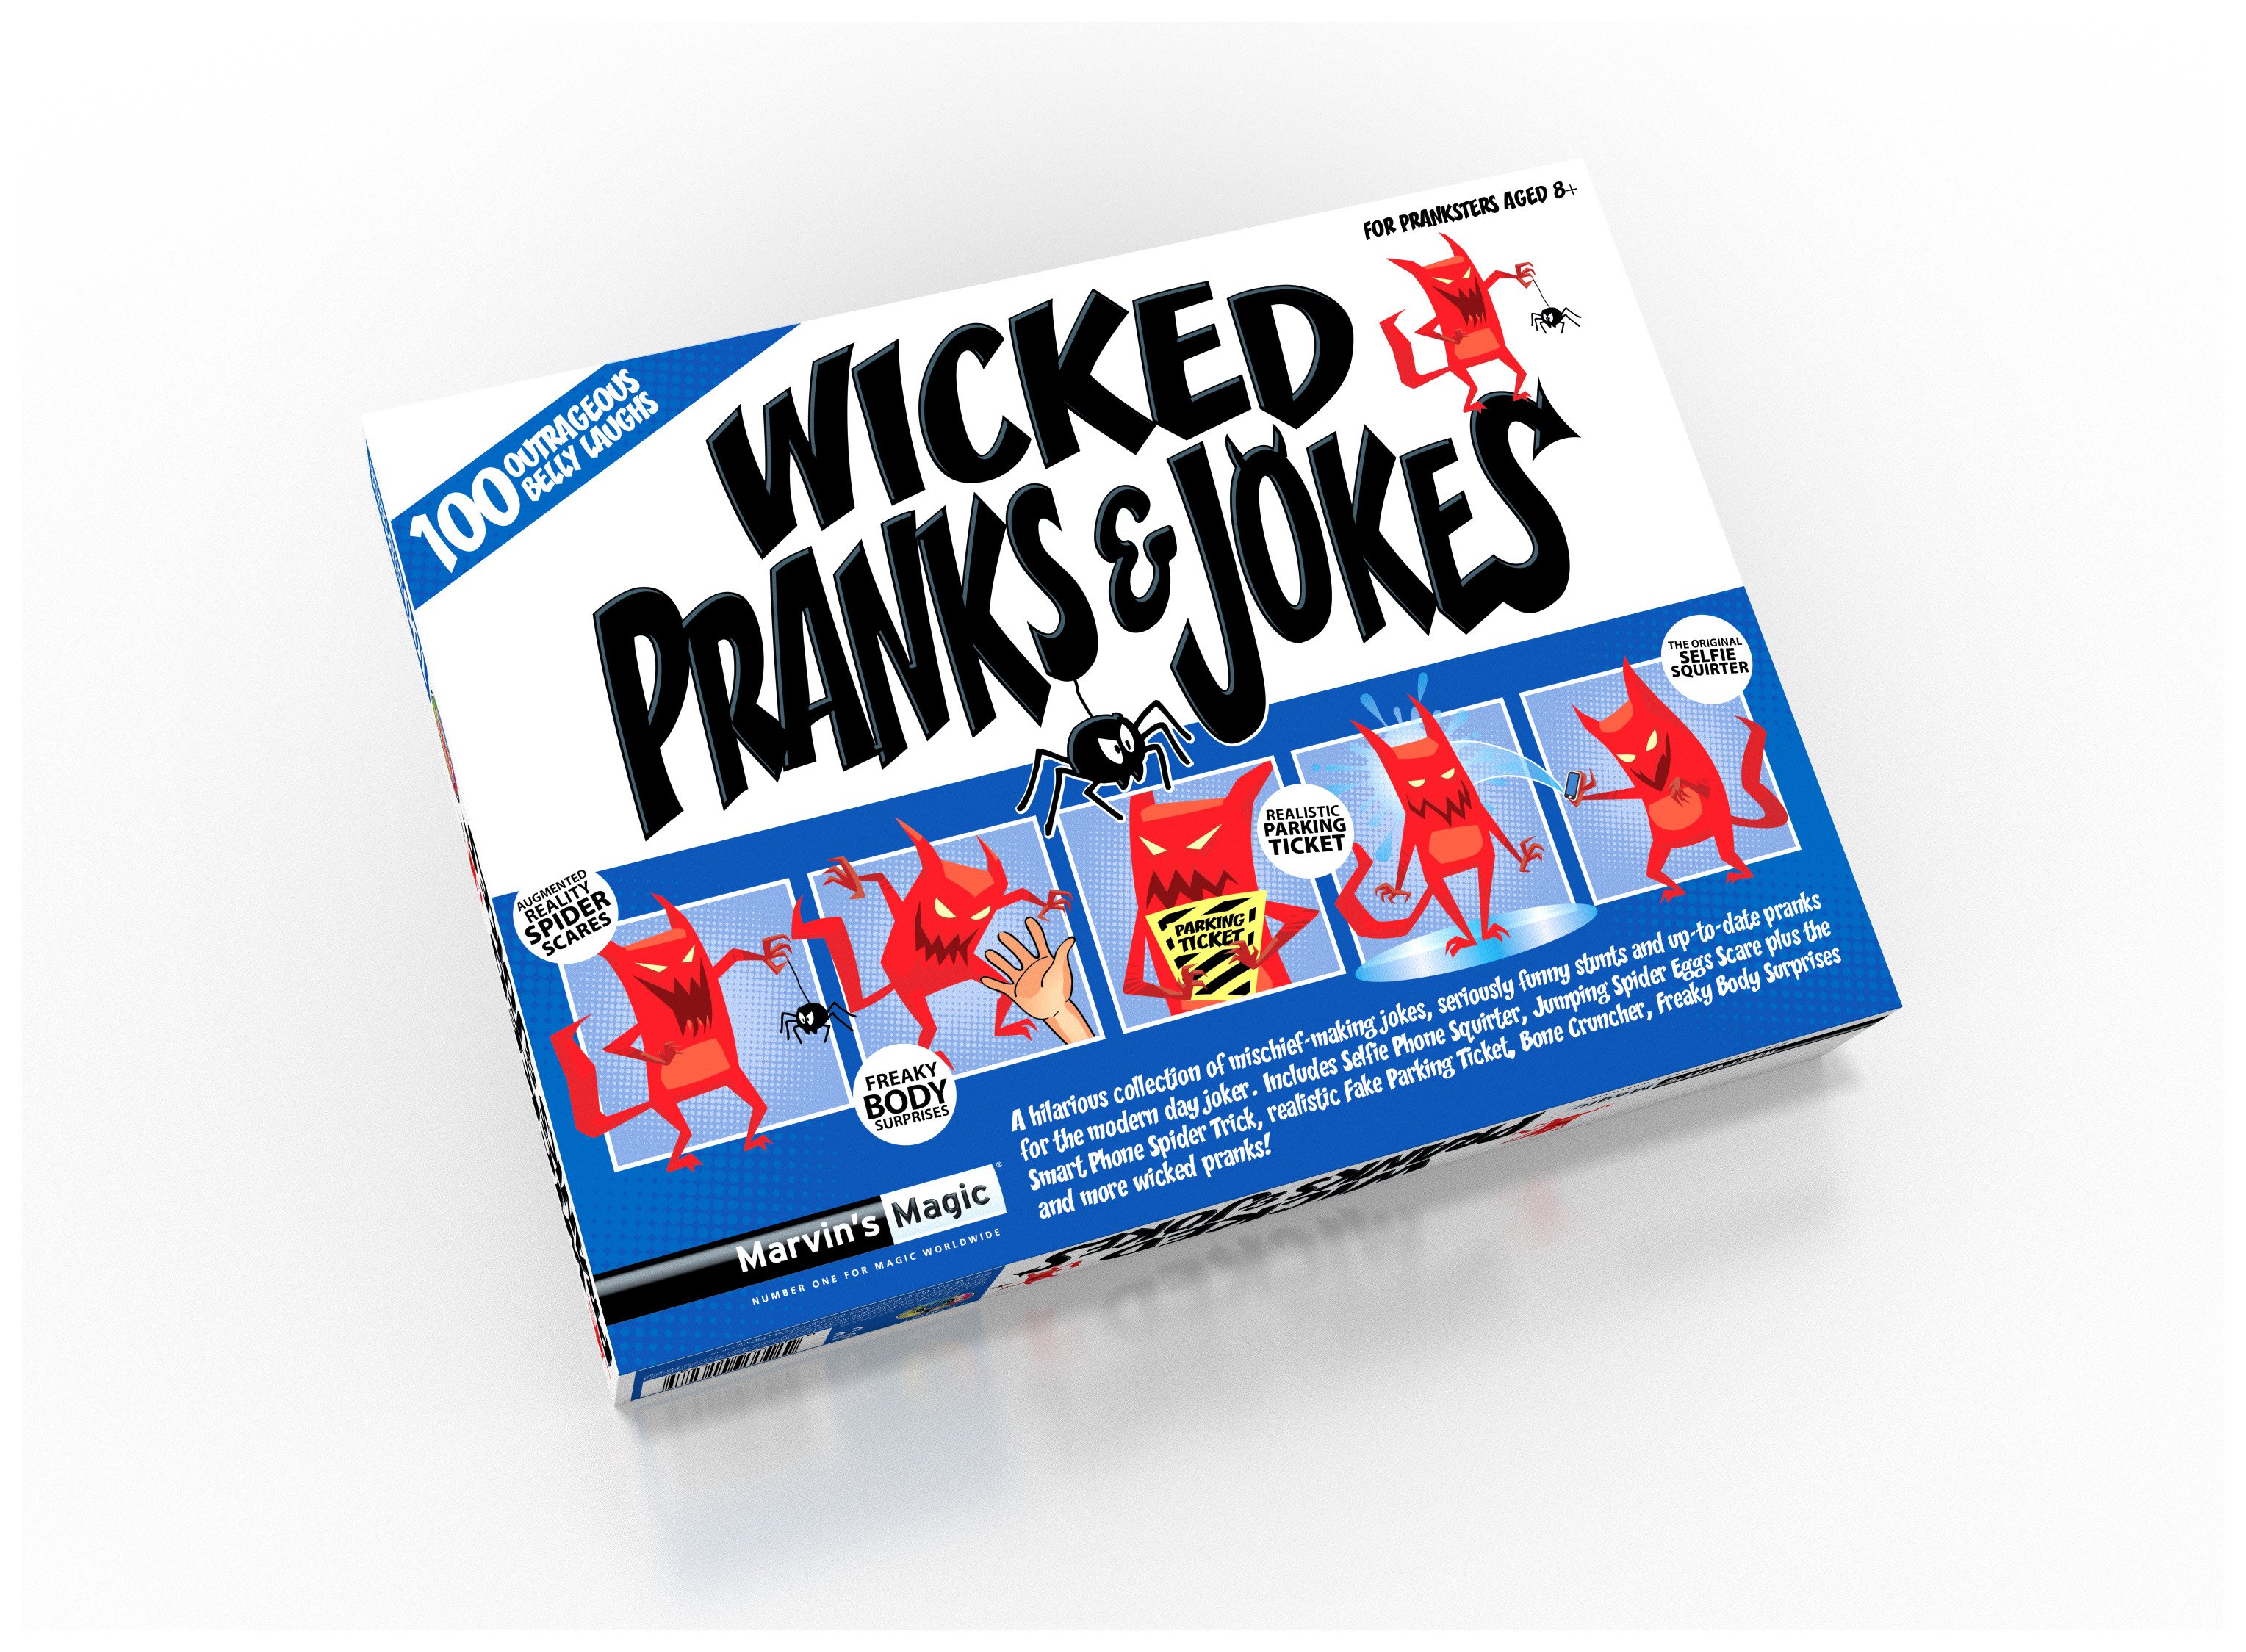 Marvin's Magic Wicked Pranks and Jokes Set Review